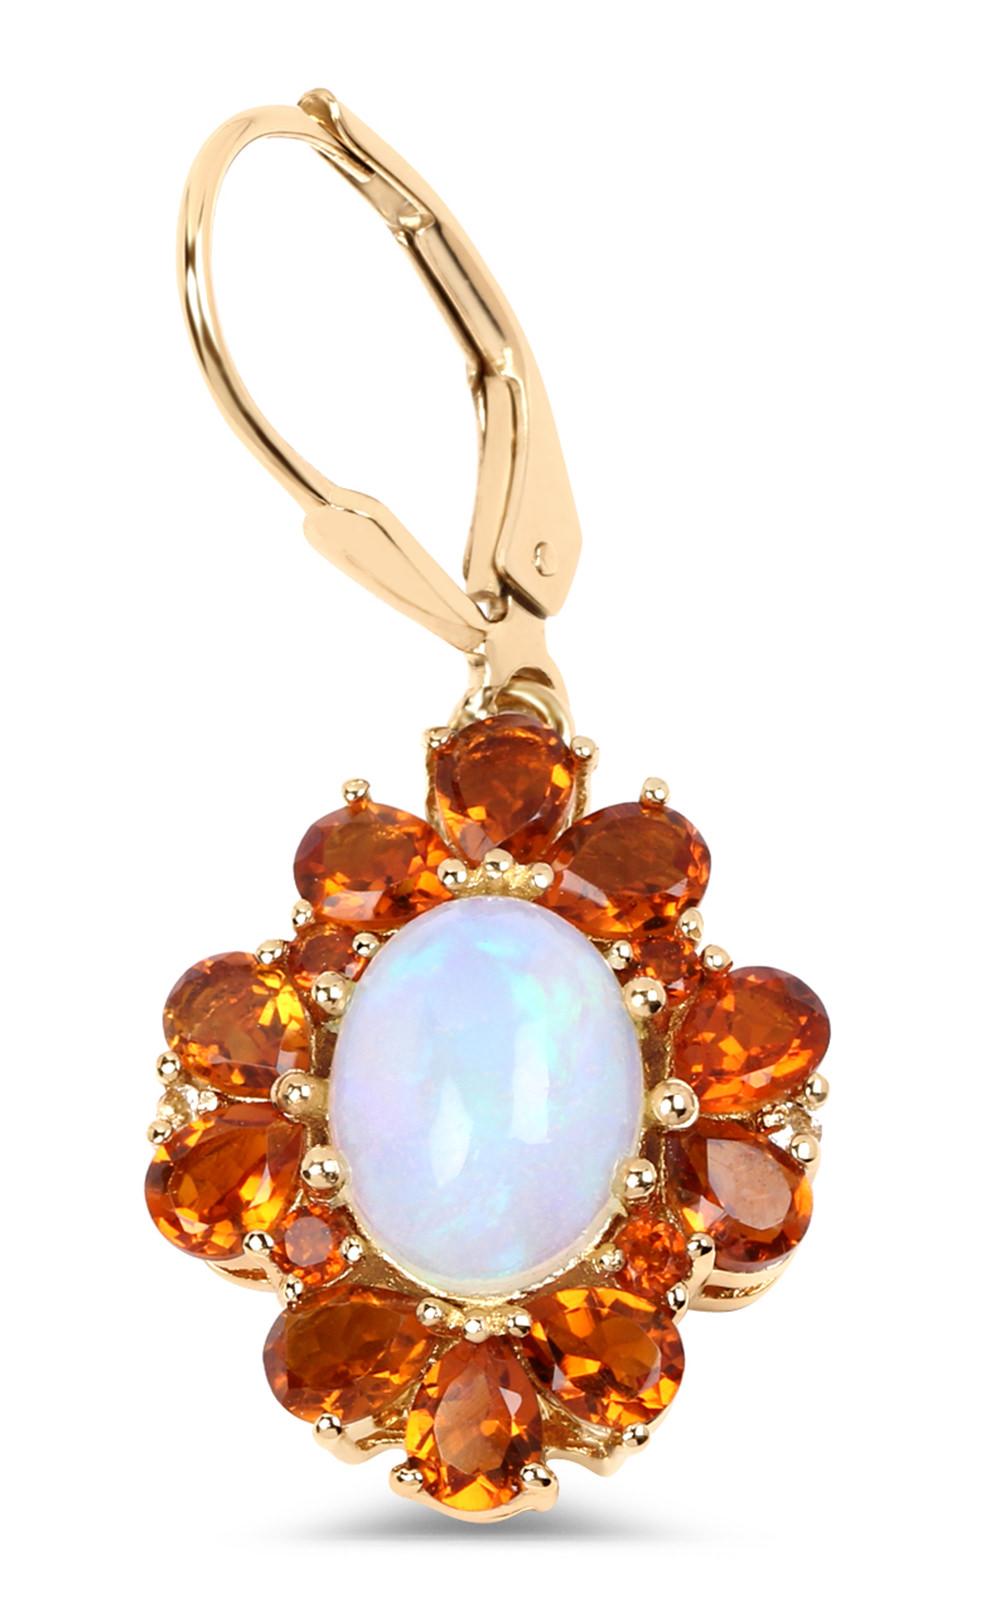 It comes with the appraisal by GIA GG/AJP 
Stones: Ethiopian Opal, Citrine
Ethiopian Opal = 2 Carats
Cut: Oval, Cabochon
Citrine = 3.40 Carats
Cut: Pear, Round
White Topaz = 0.05 Carats
Total Quantity Of Stones: 34
Metal: Silver
14K Yellow Gold